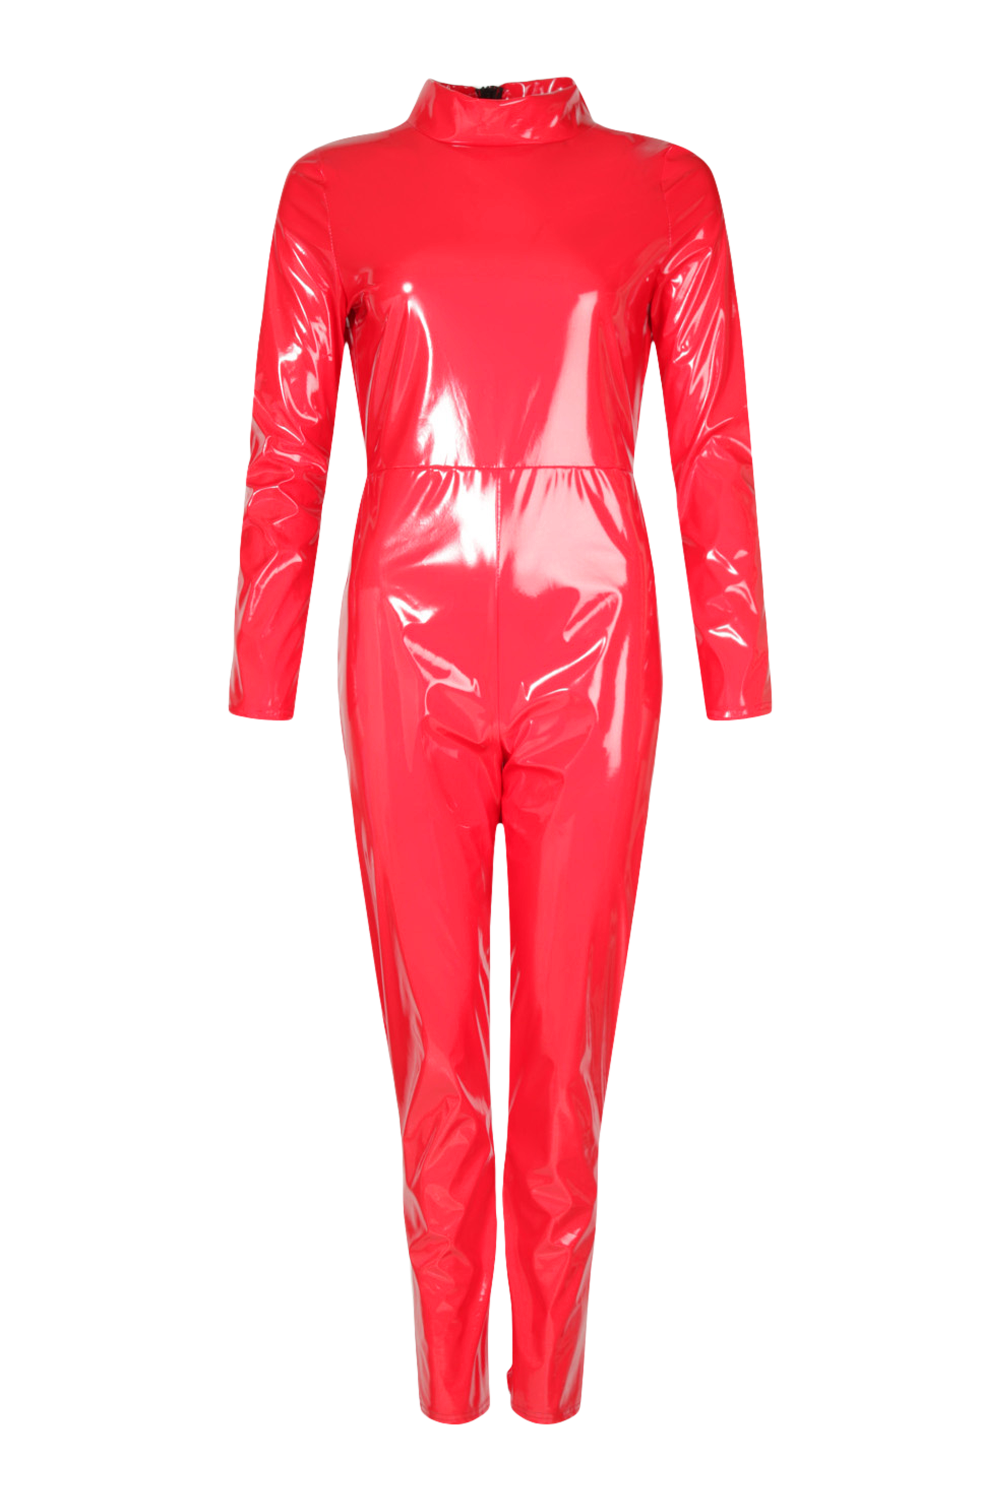 CamiCat-Catsuit-Bodysuit in Stretch Gloss Red Vinyl